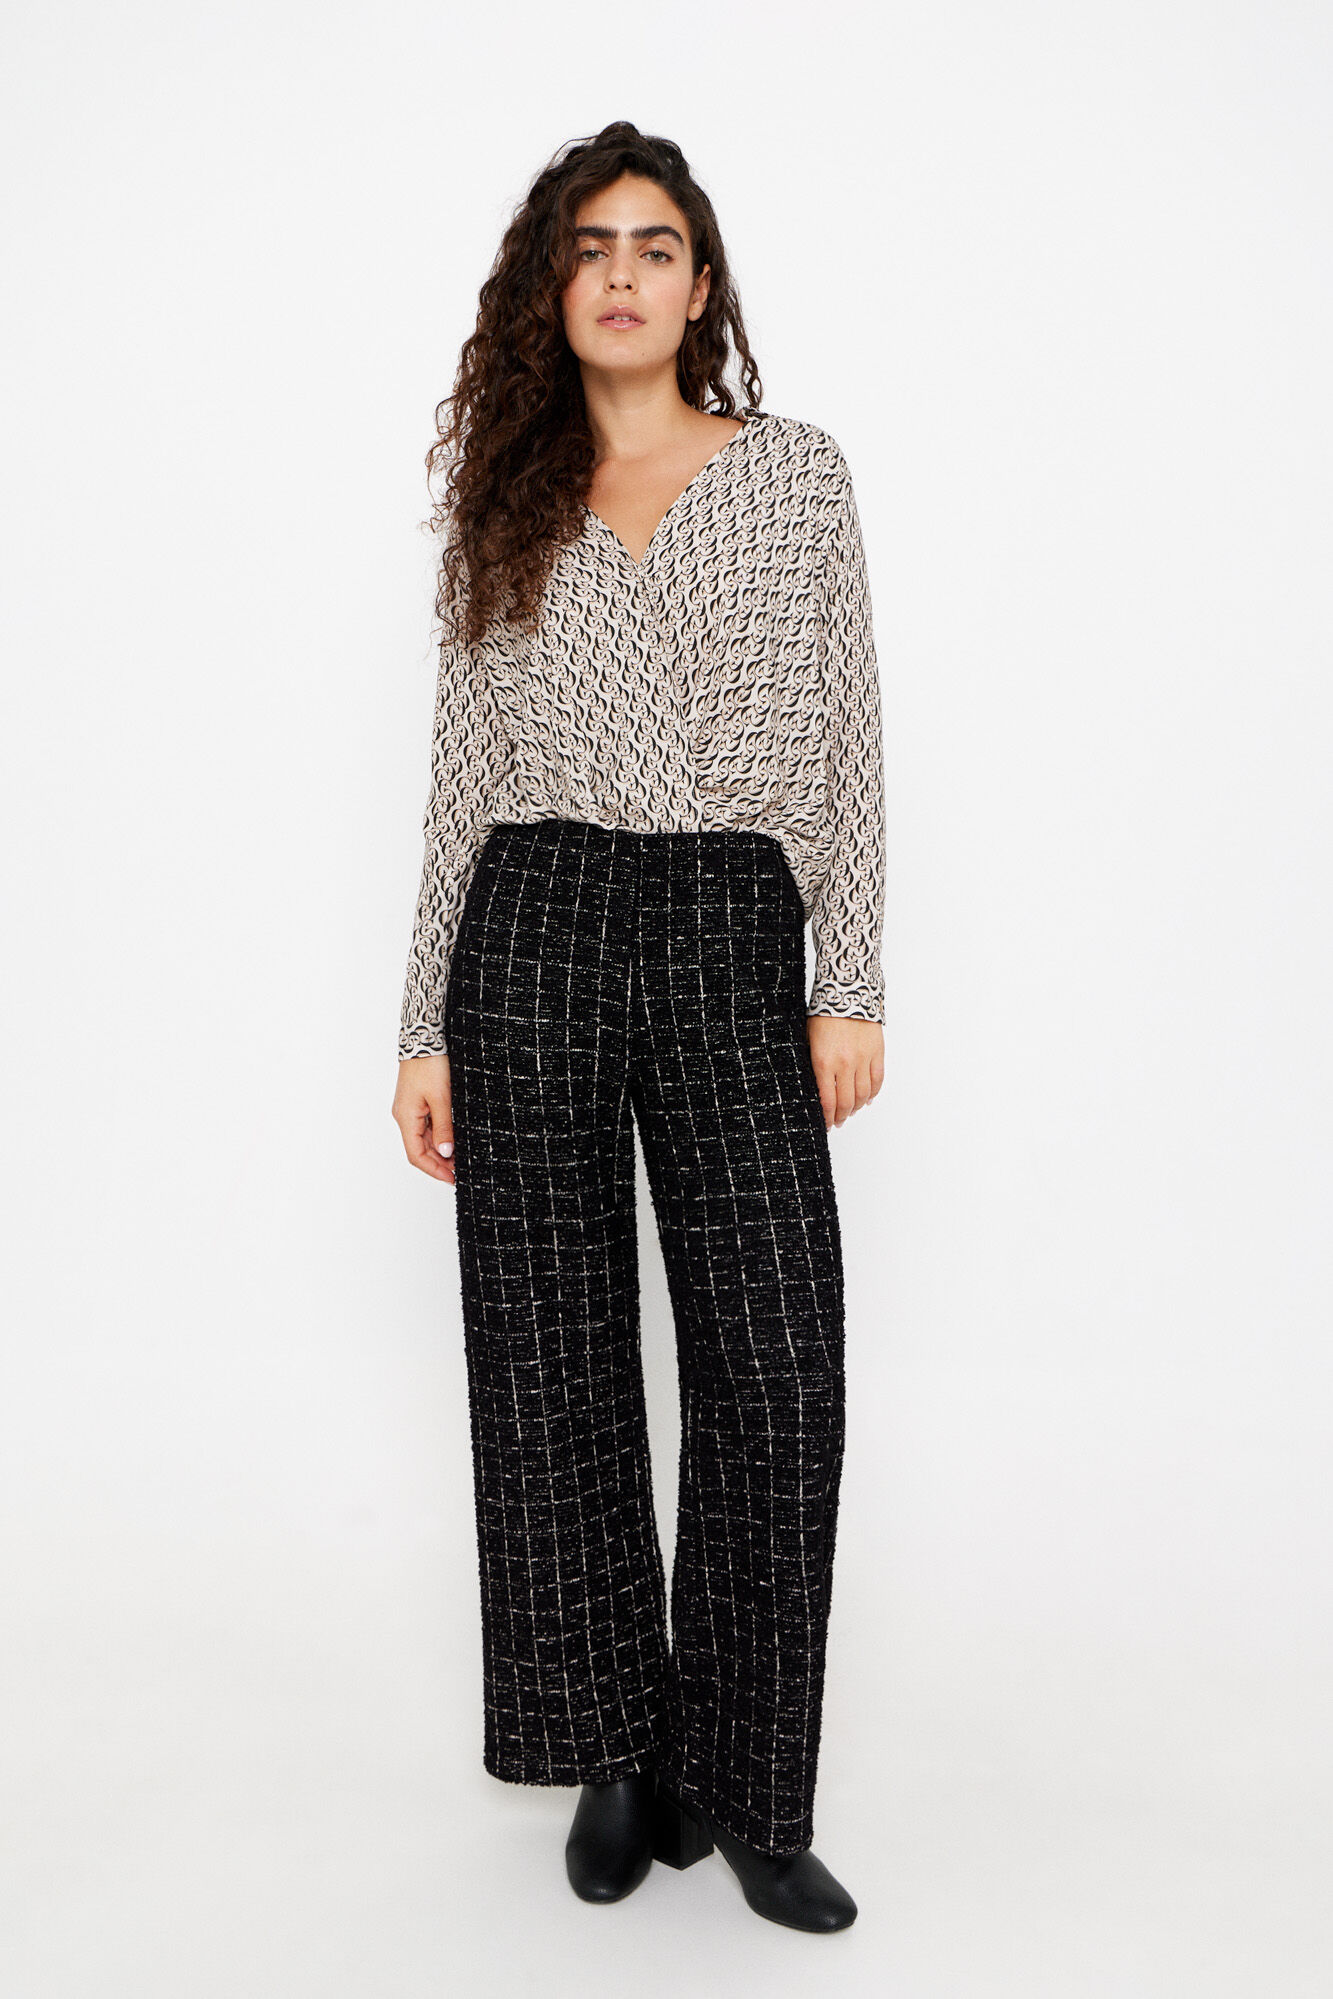 The Most Flattering Pants for Your Body Type | Fashion, Flattering pants,  Pants for women